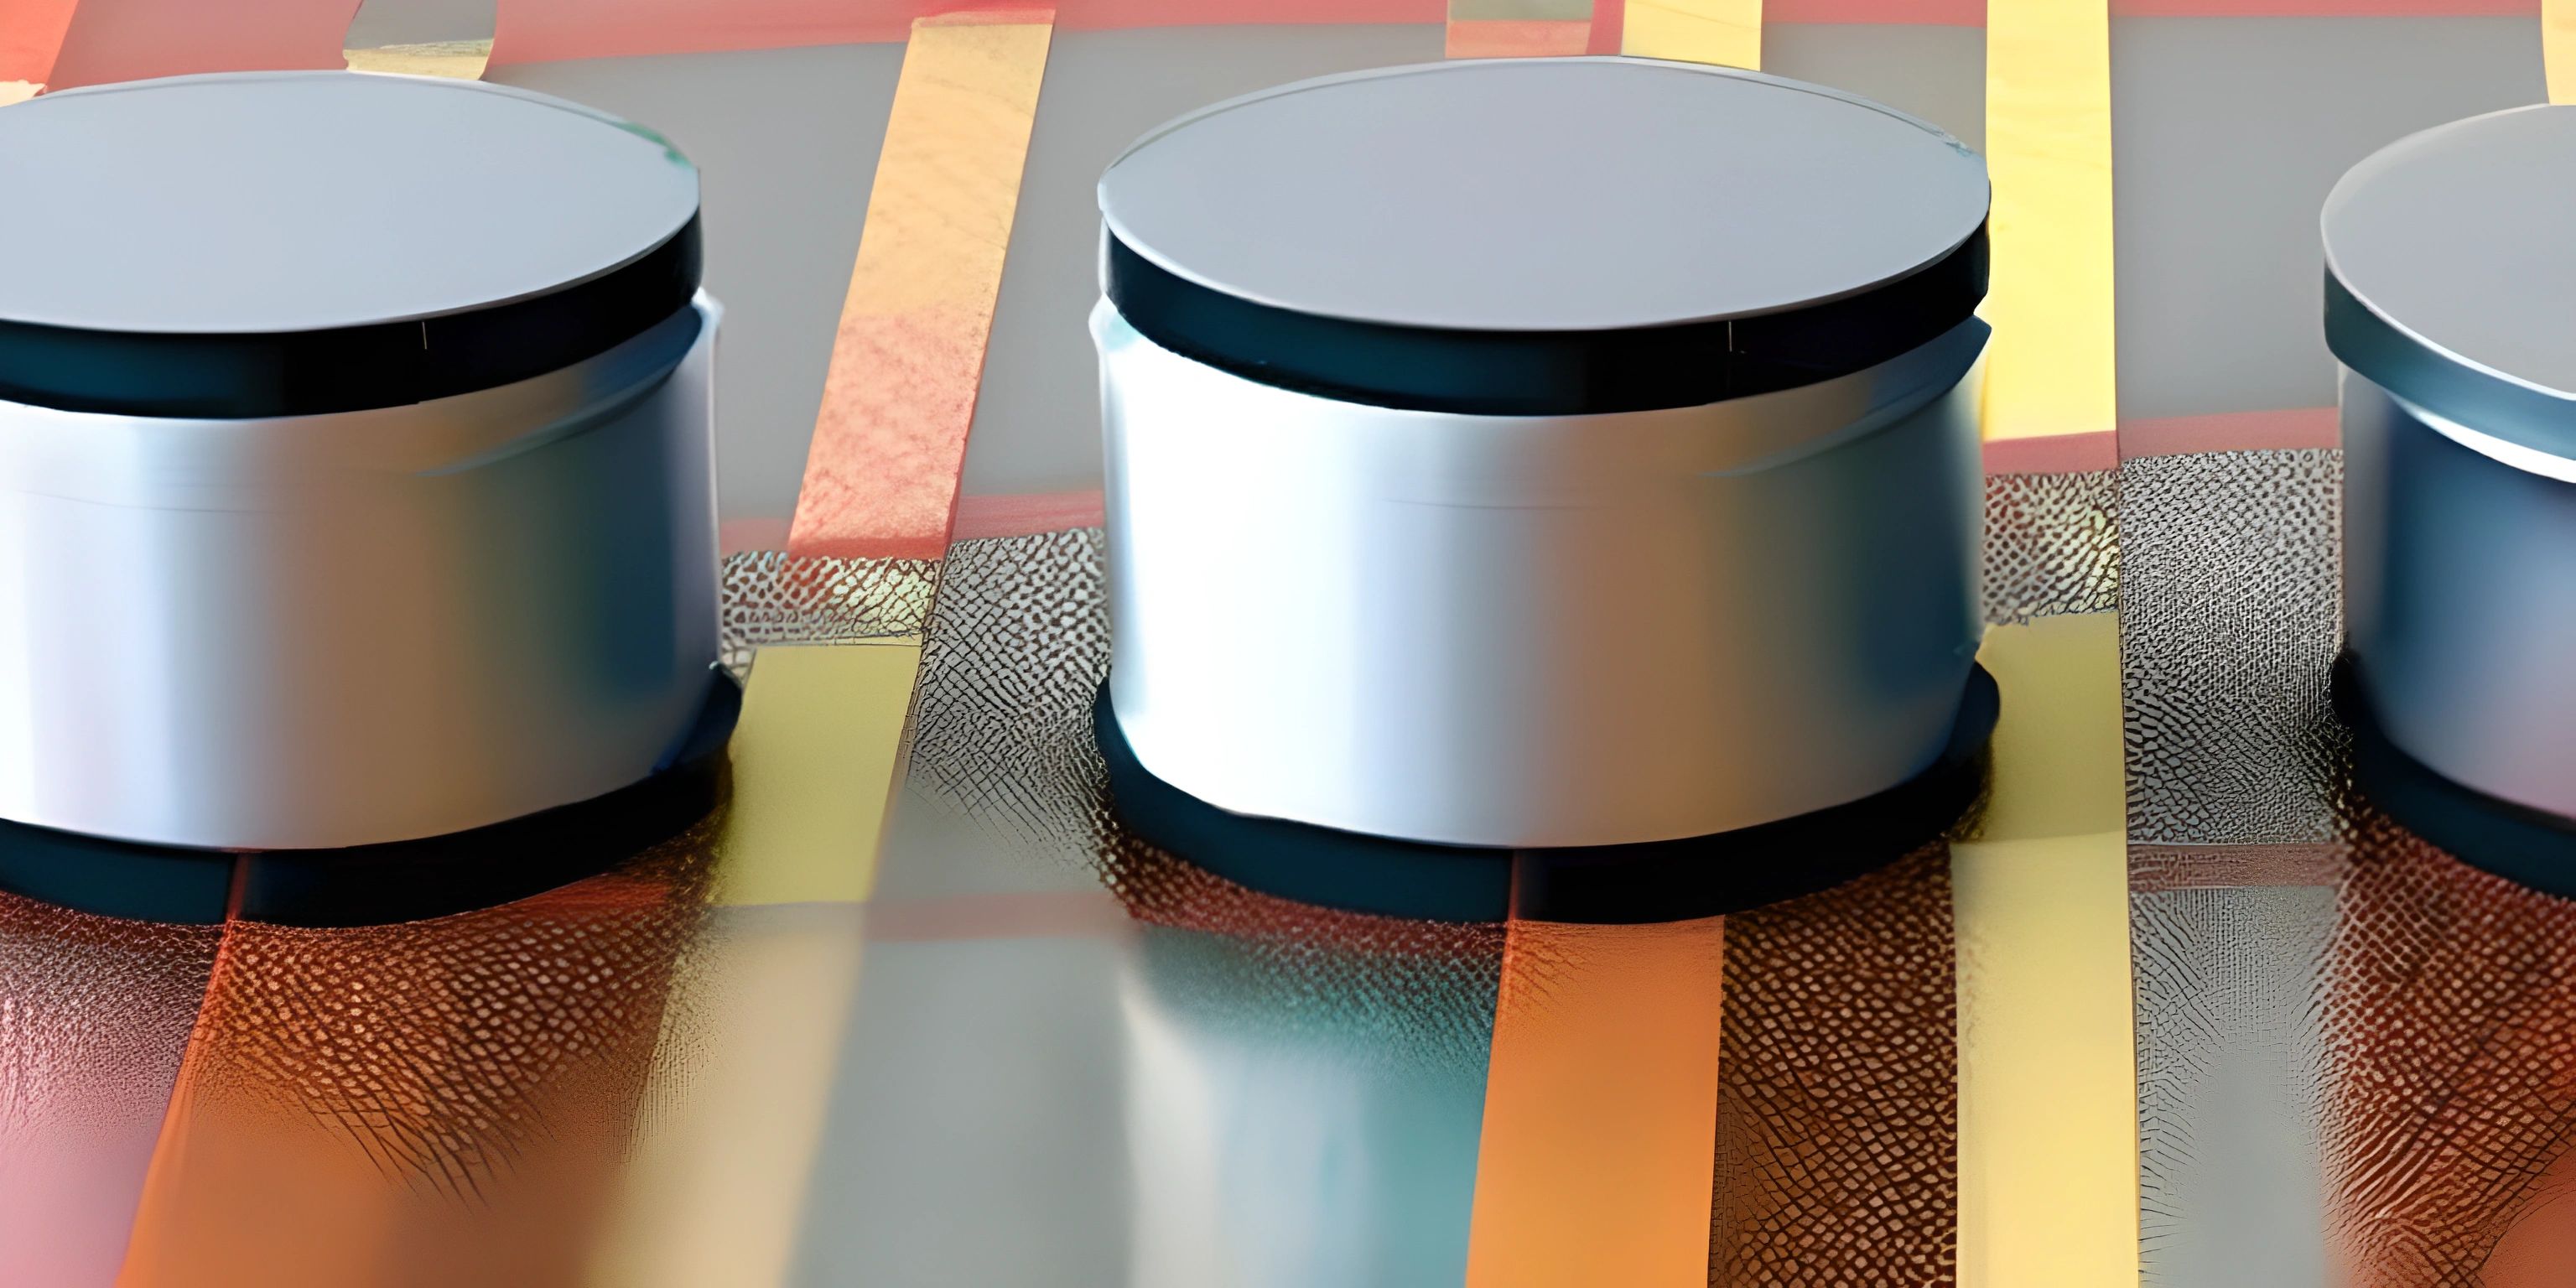 two stools with lids sitting on top of a colorful rug, with squares of color in the background